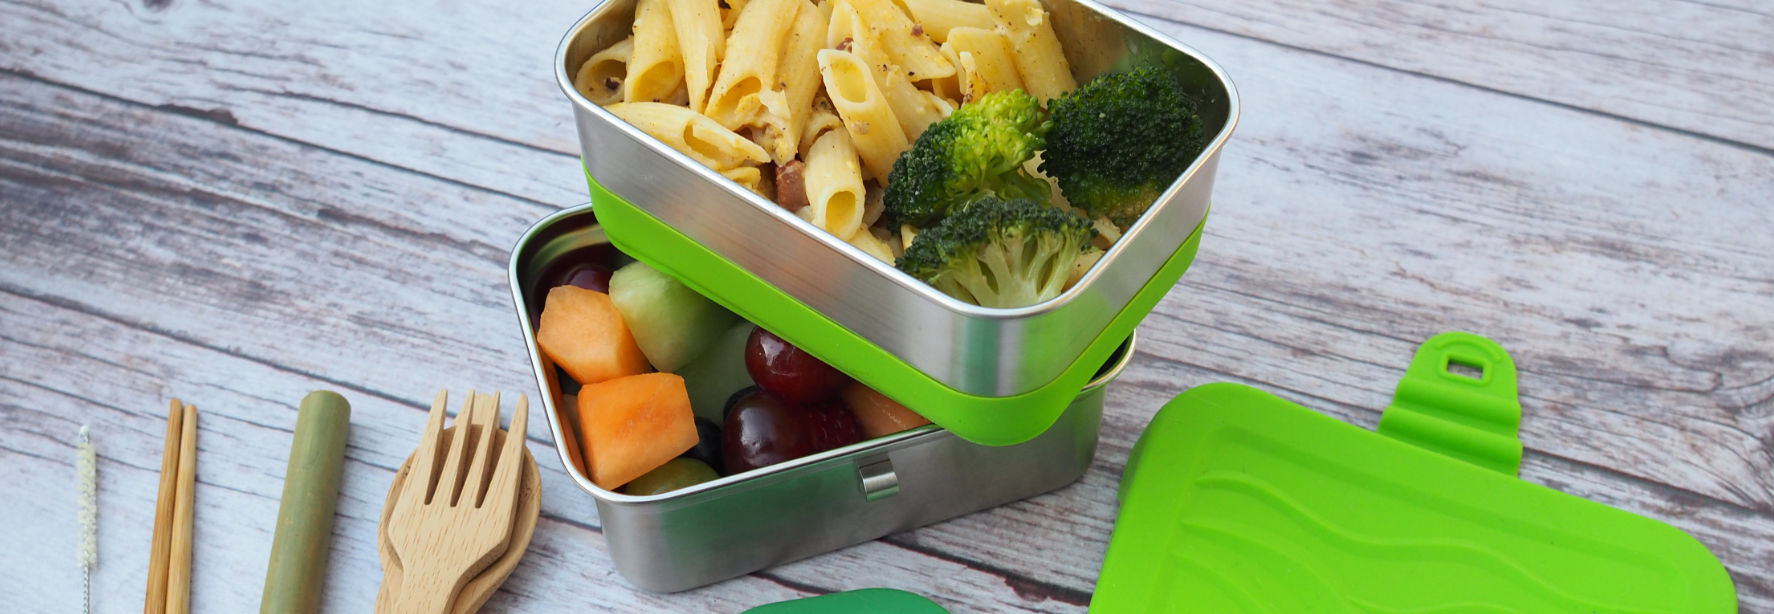 ECOlunchbox Blue Water Bento containers holding pasta, broccoli, and fruits on a table with reusable forks and straws.